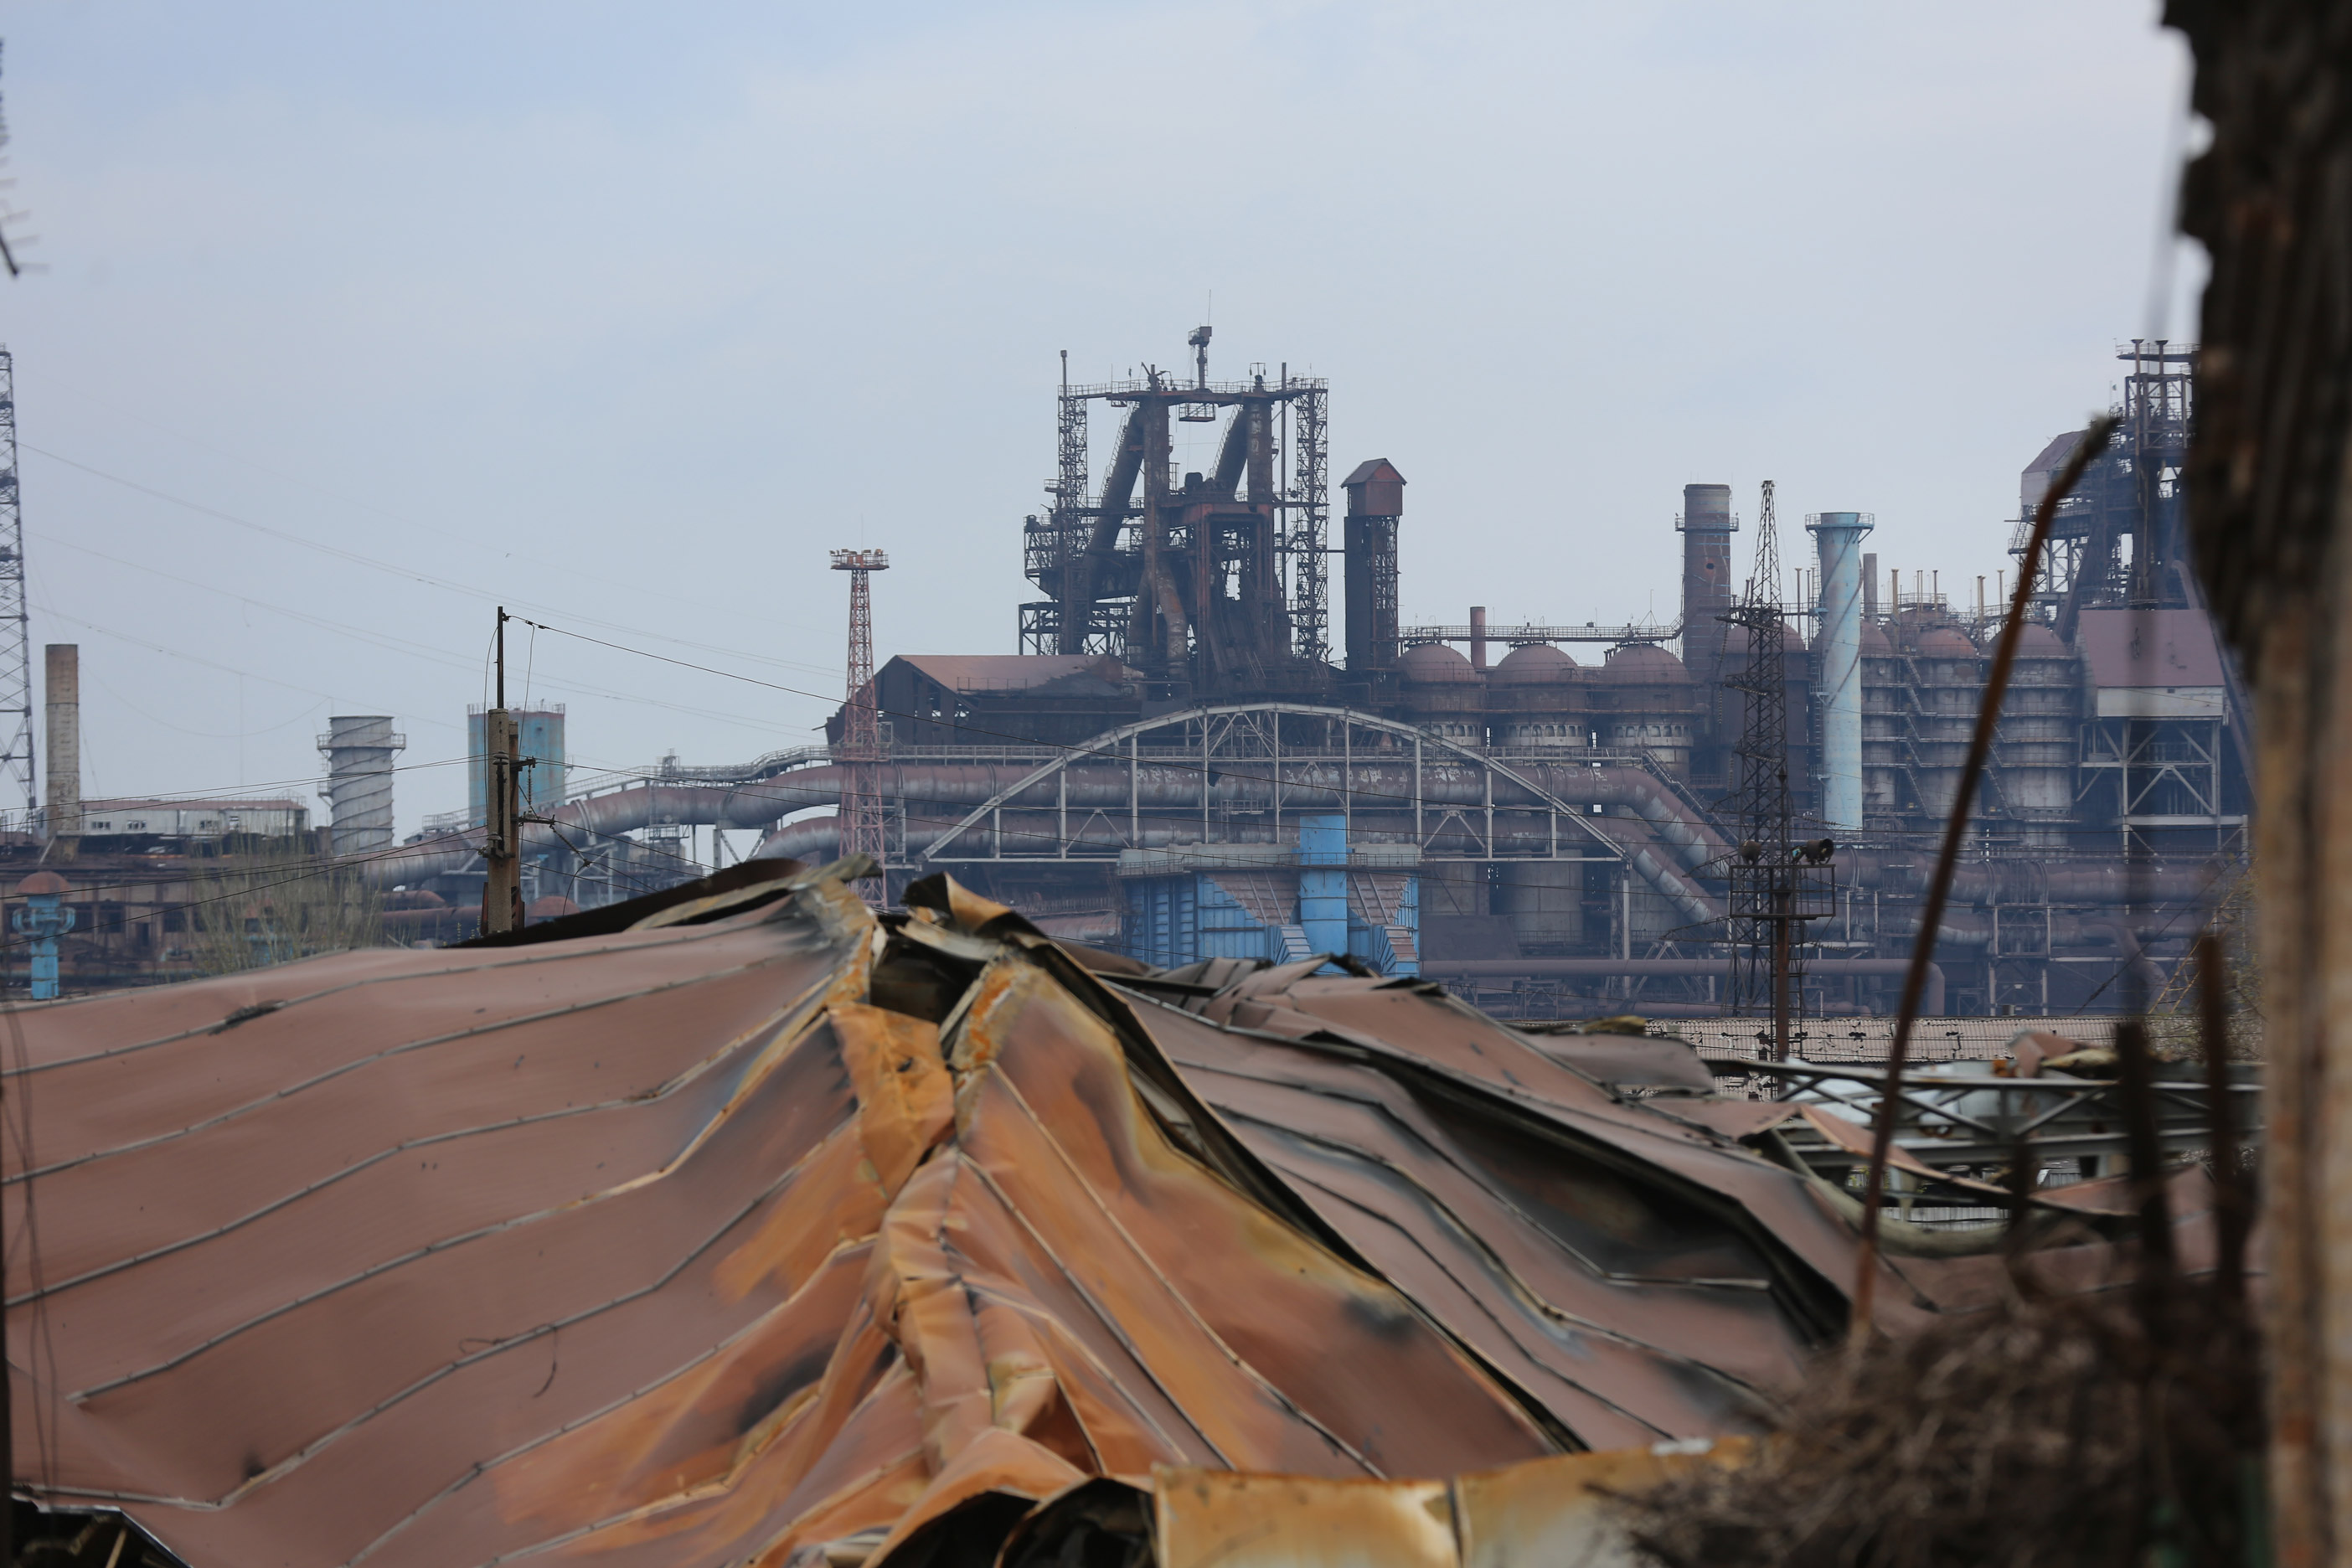  A view of the destruction in Mariupol, including the Azovstal steel plant, on April 22.